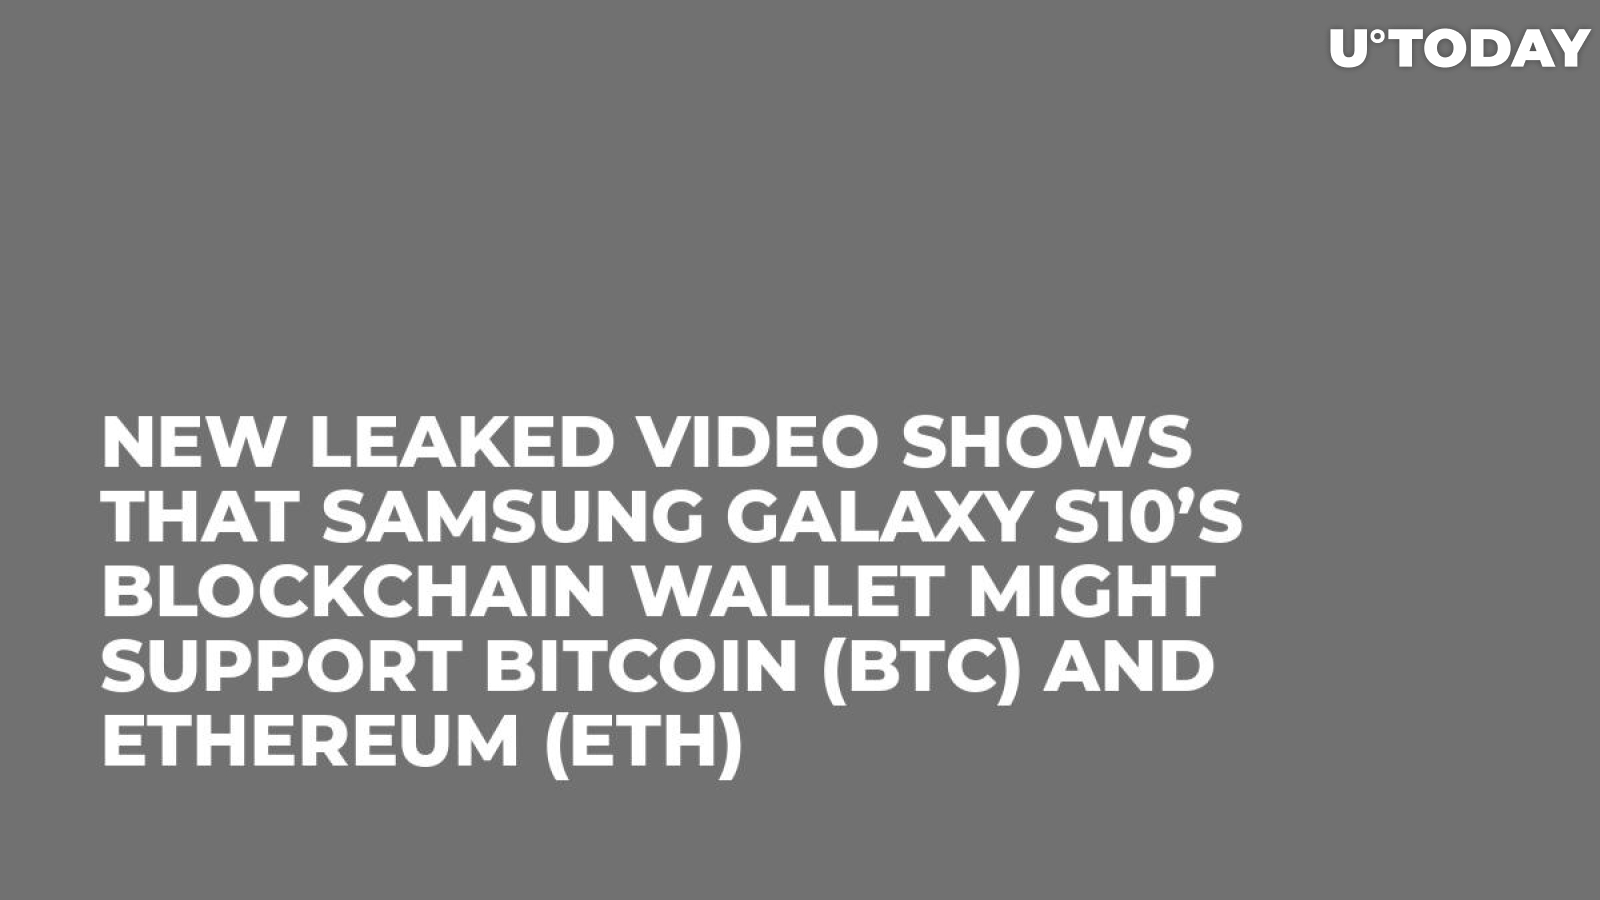 New Leaked Video Shows That Samsung Galaxy S10’s Blockchain Wallet Might Support Bitcoin (BTC) and Ethereum (ETH)